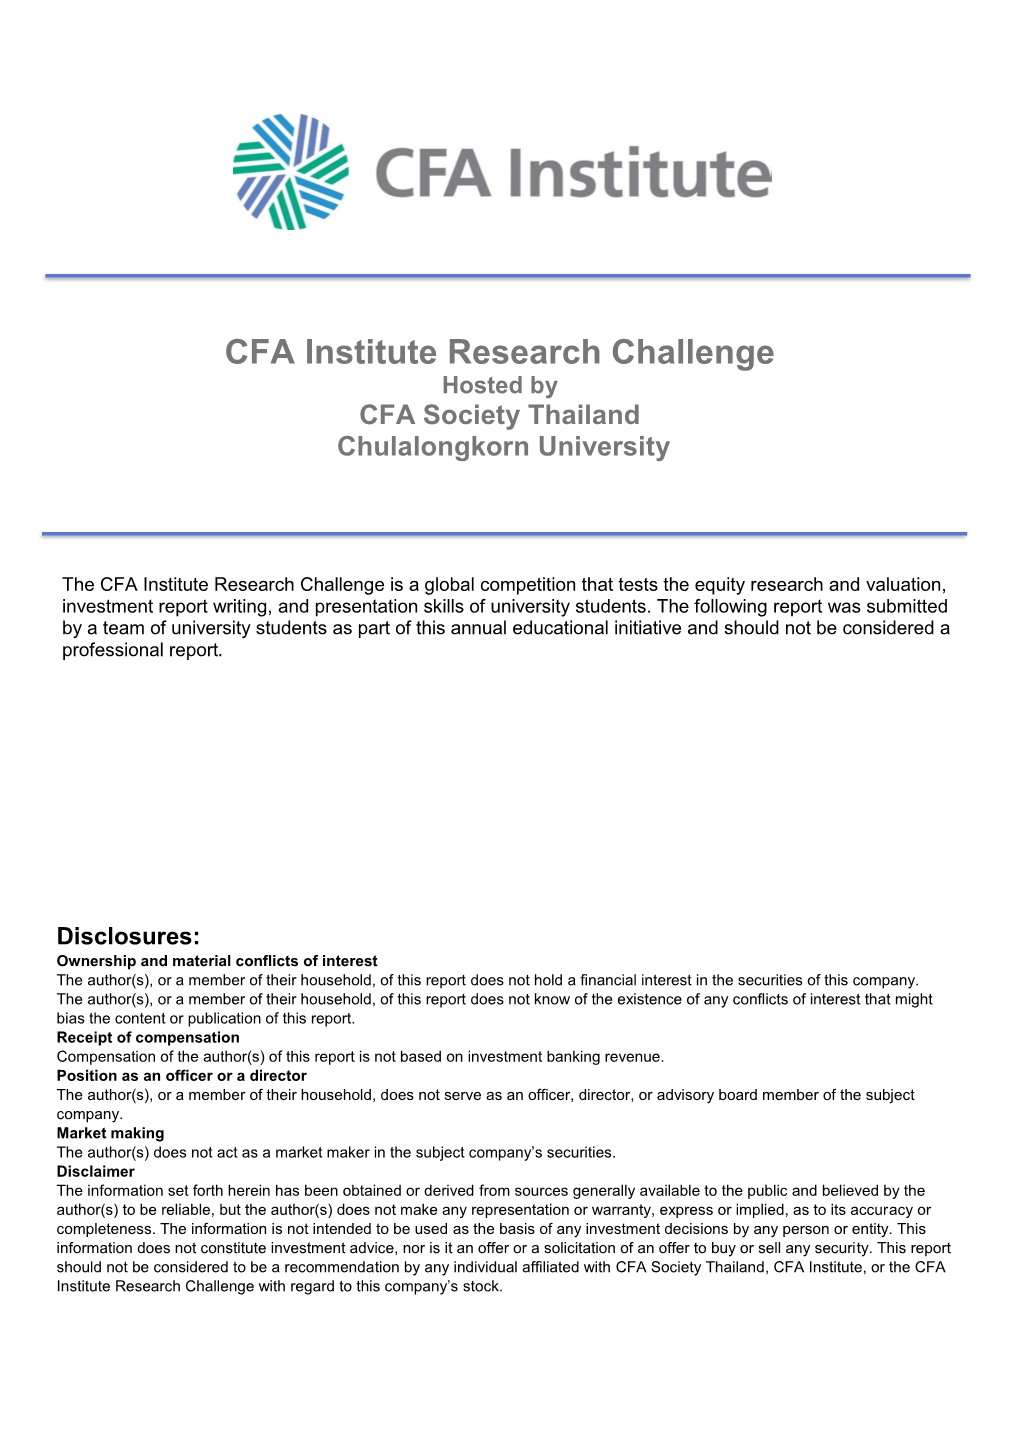 CFA Institute Research Challenge Hosted by CFA Society Thailand Chulalongkorn University